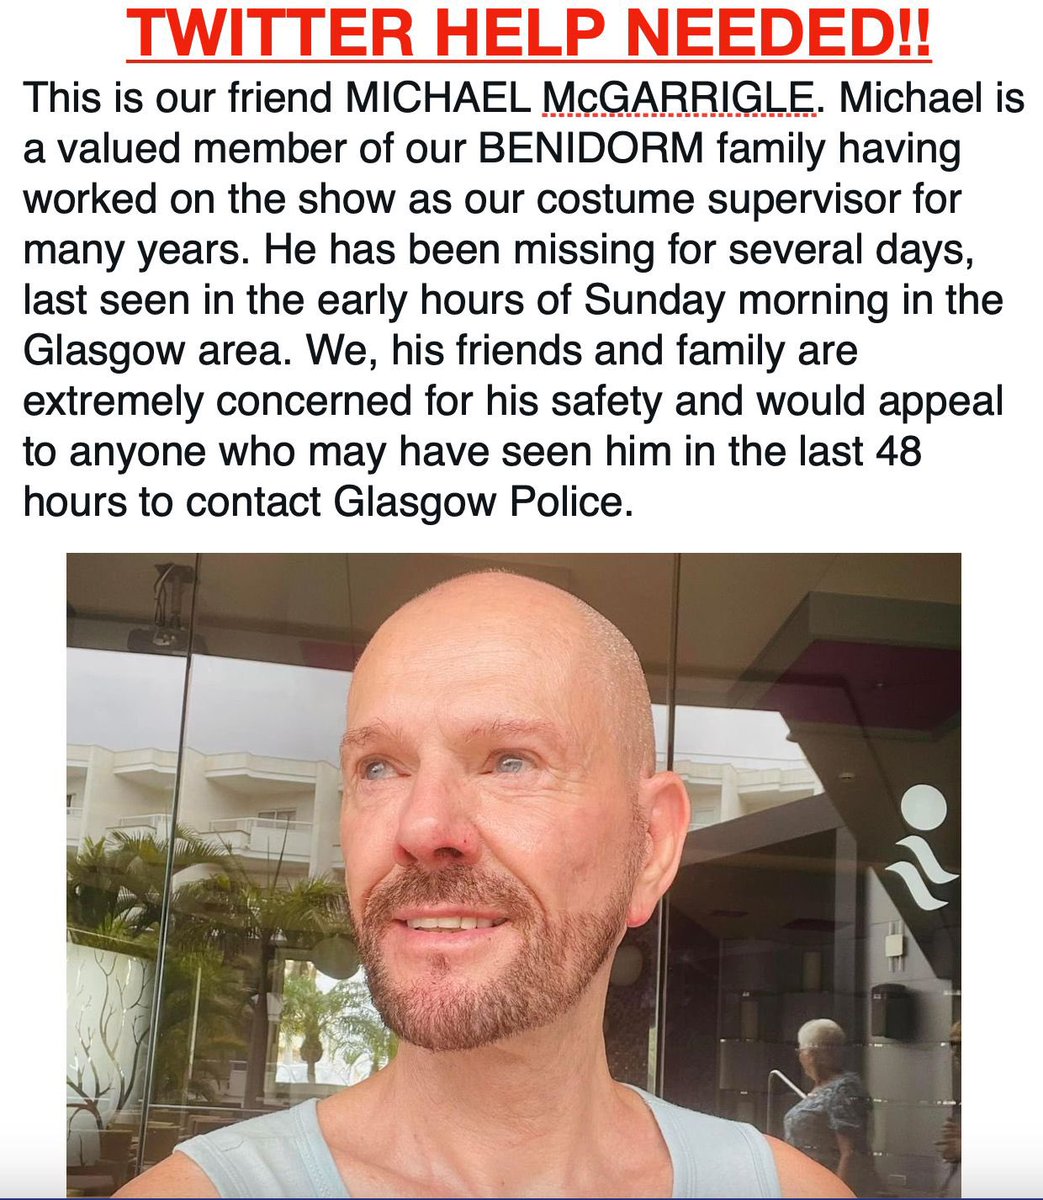 Please Help find Michael. The loveliest calmest costume guy i have ever worked with